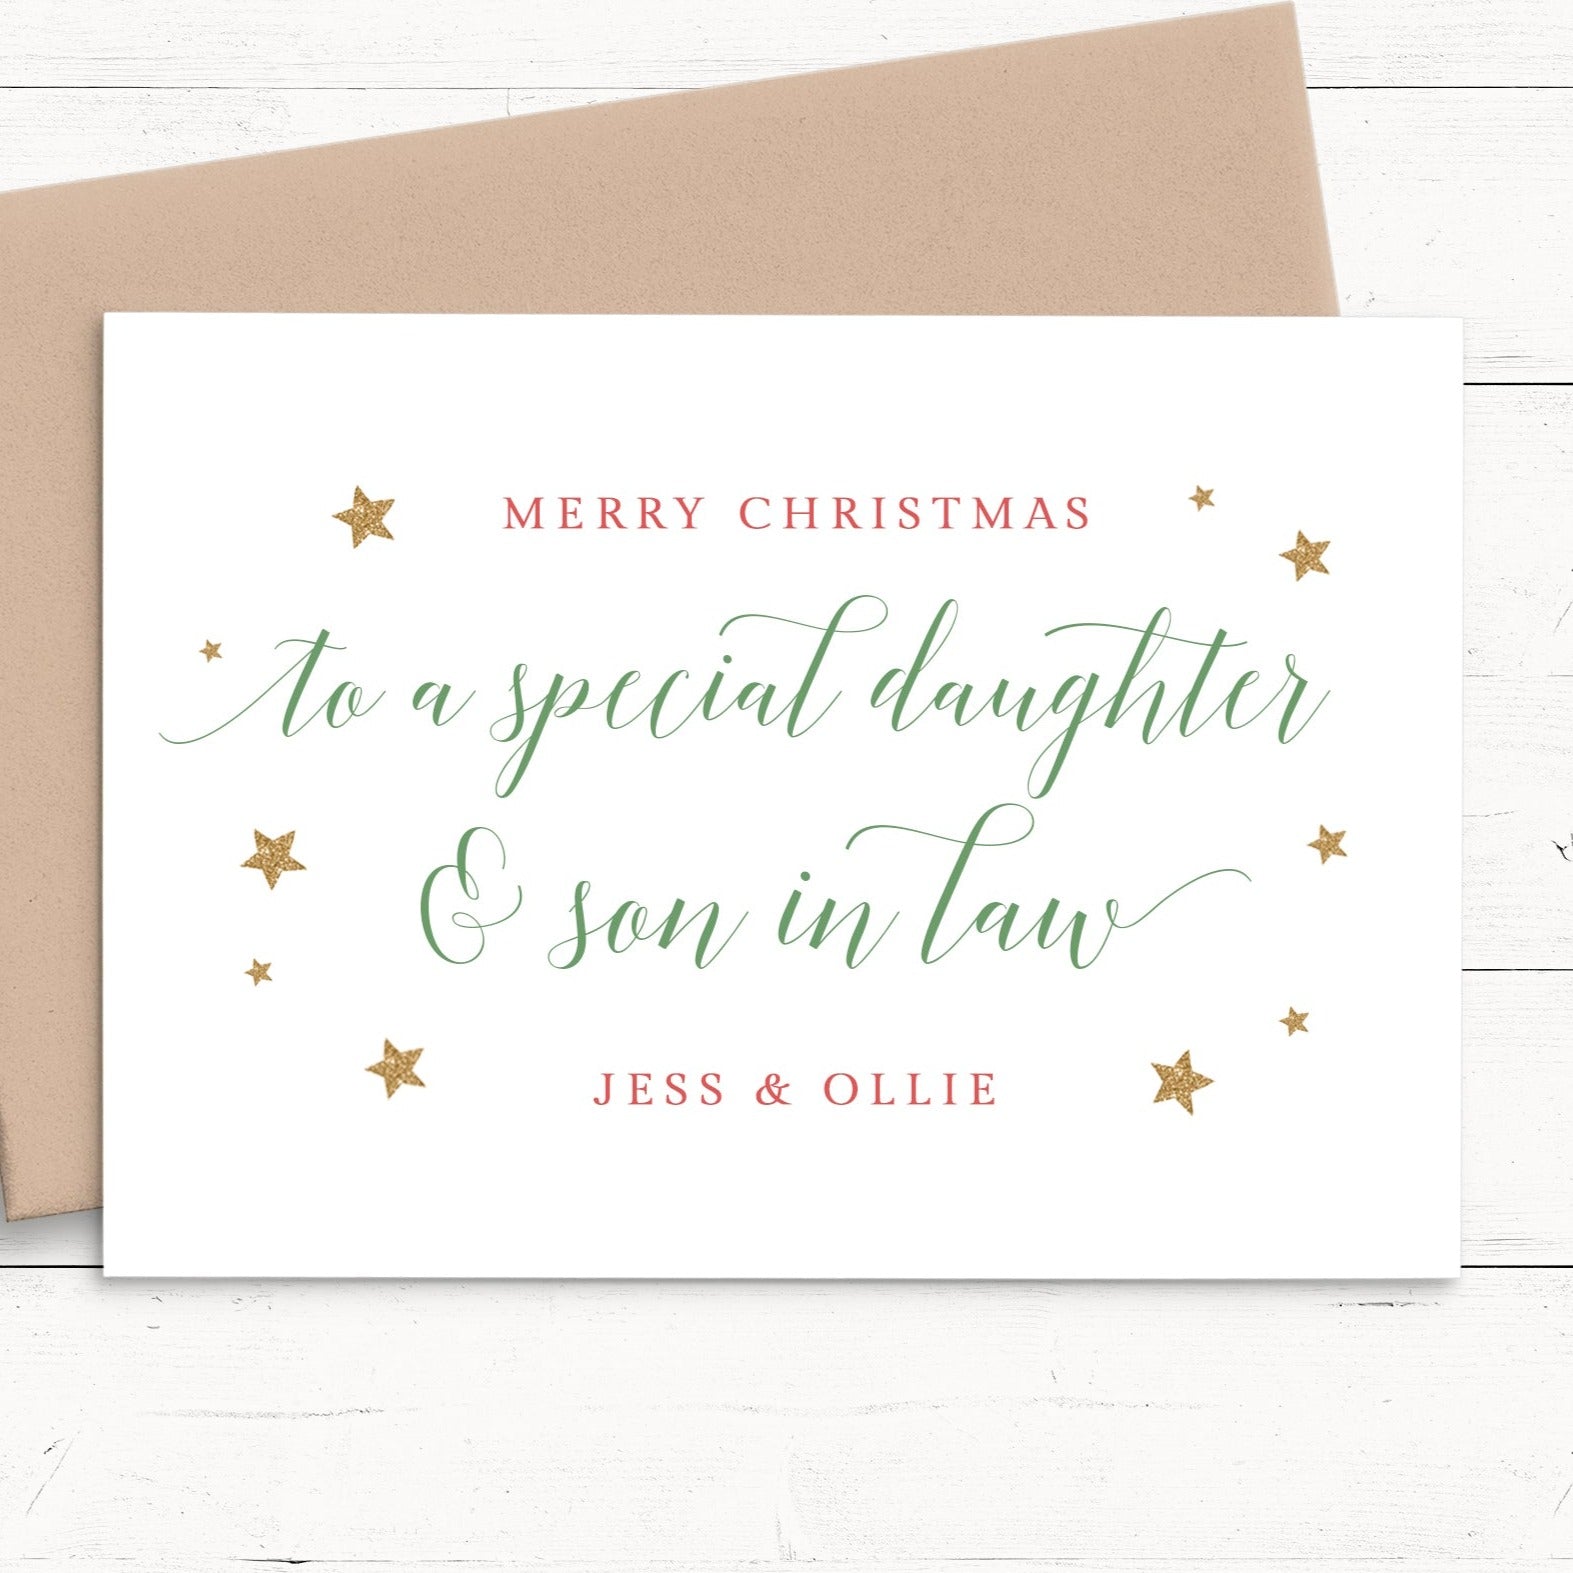 merry christmas to a special daughter and son in law card personalised matte white cardstock kraft brown envelope